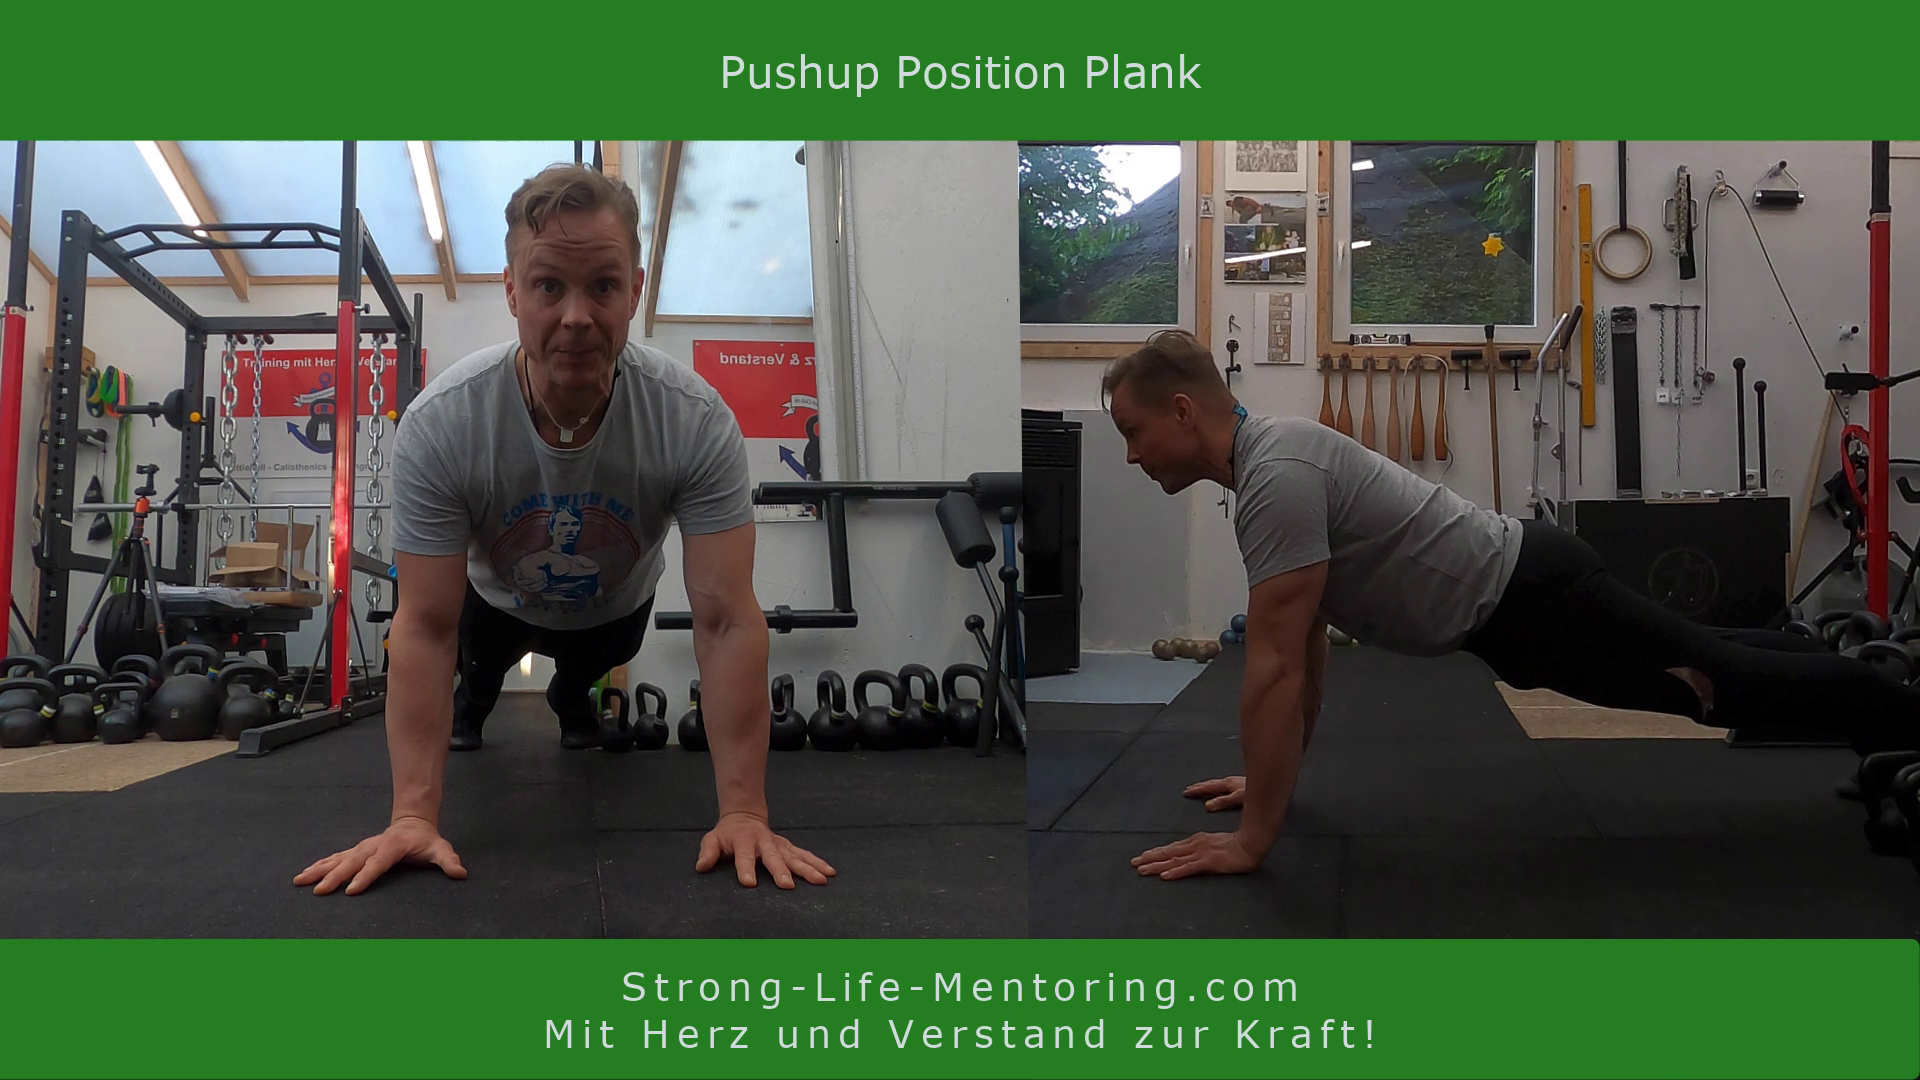 Pushup Position Plank